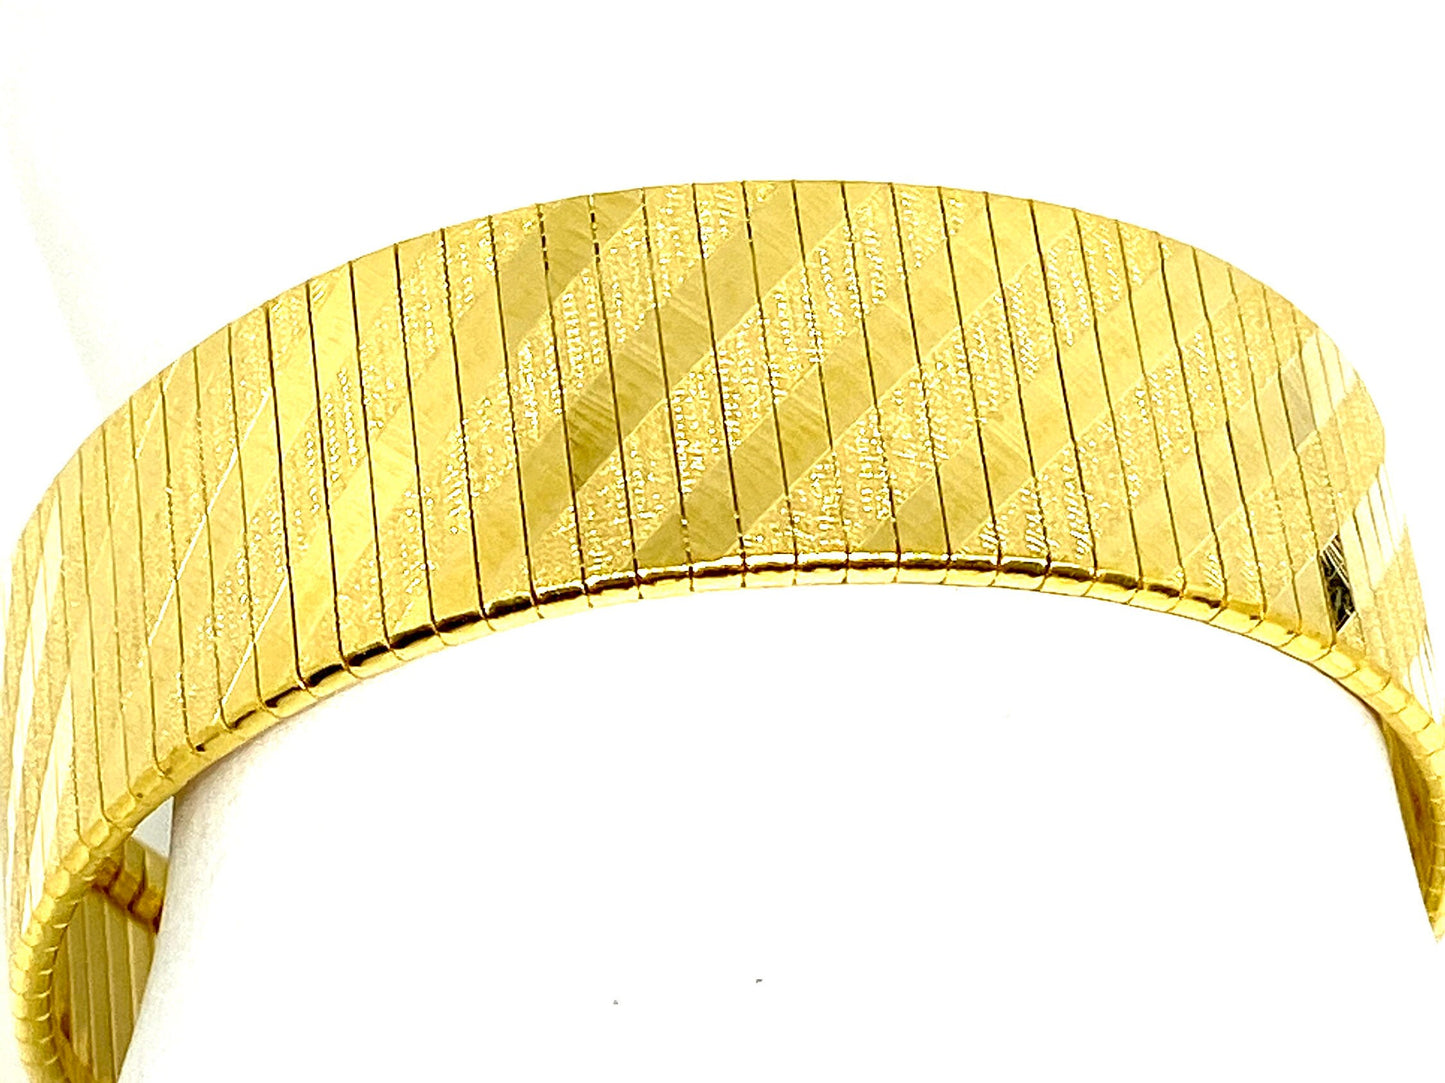 Yellow Gold Over Sterling Silver Wide Cubetto Link Flex Bracelet